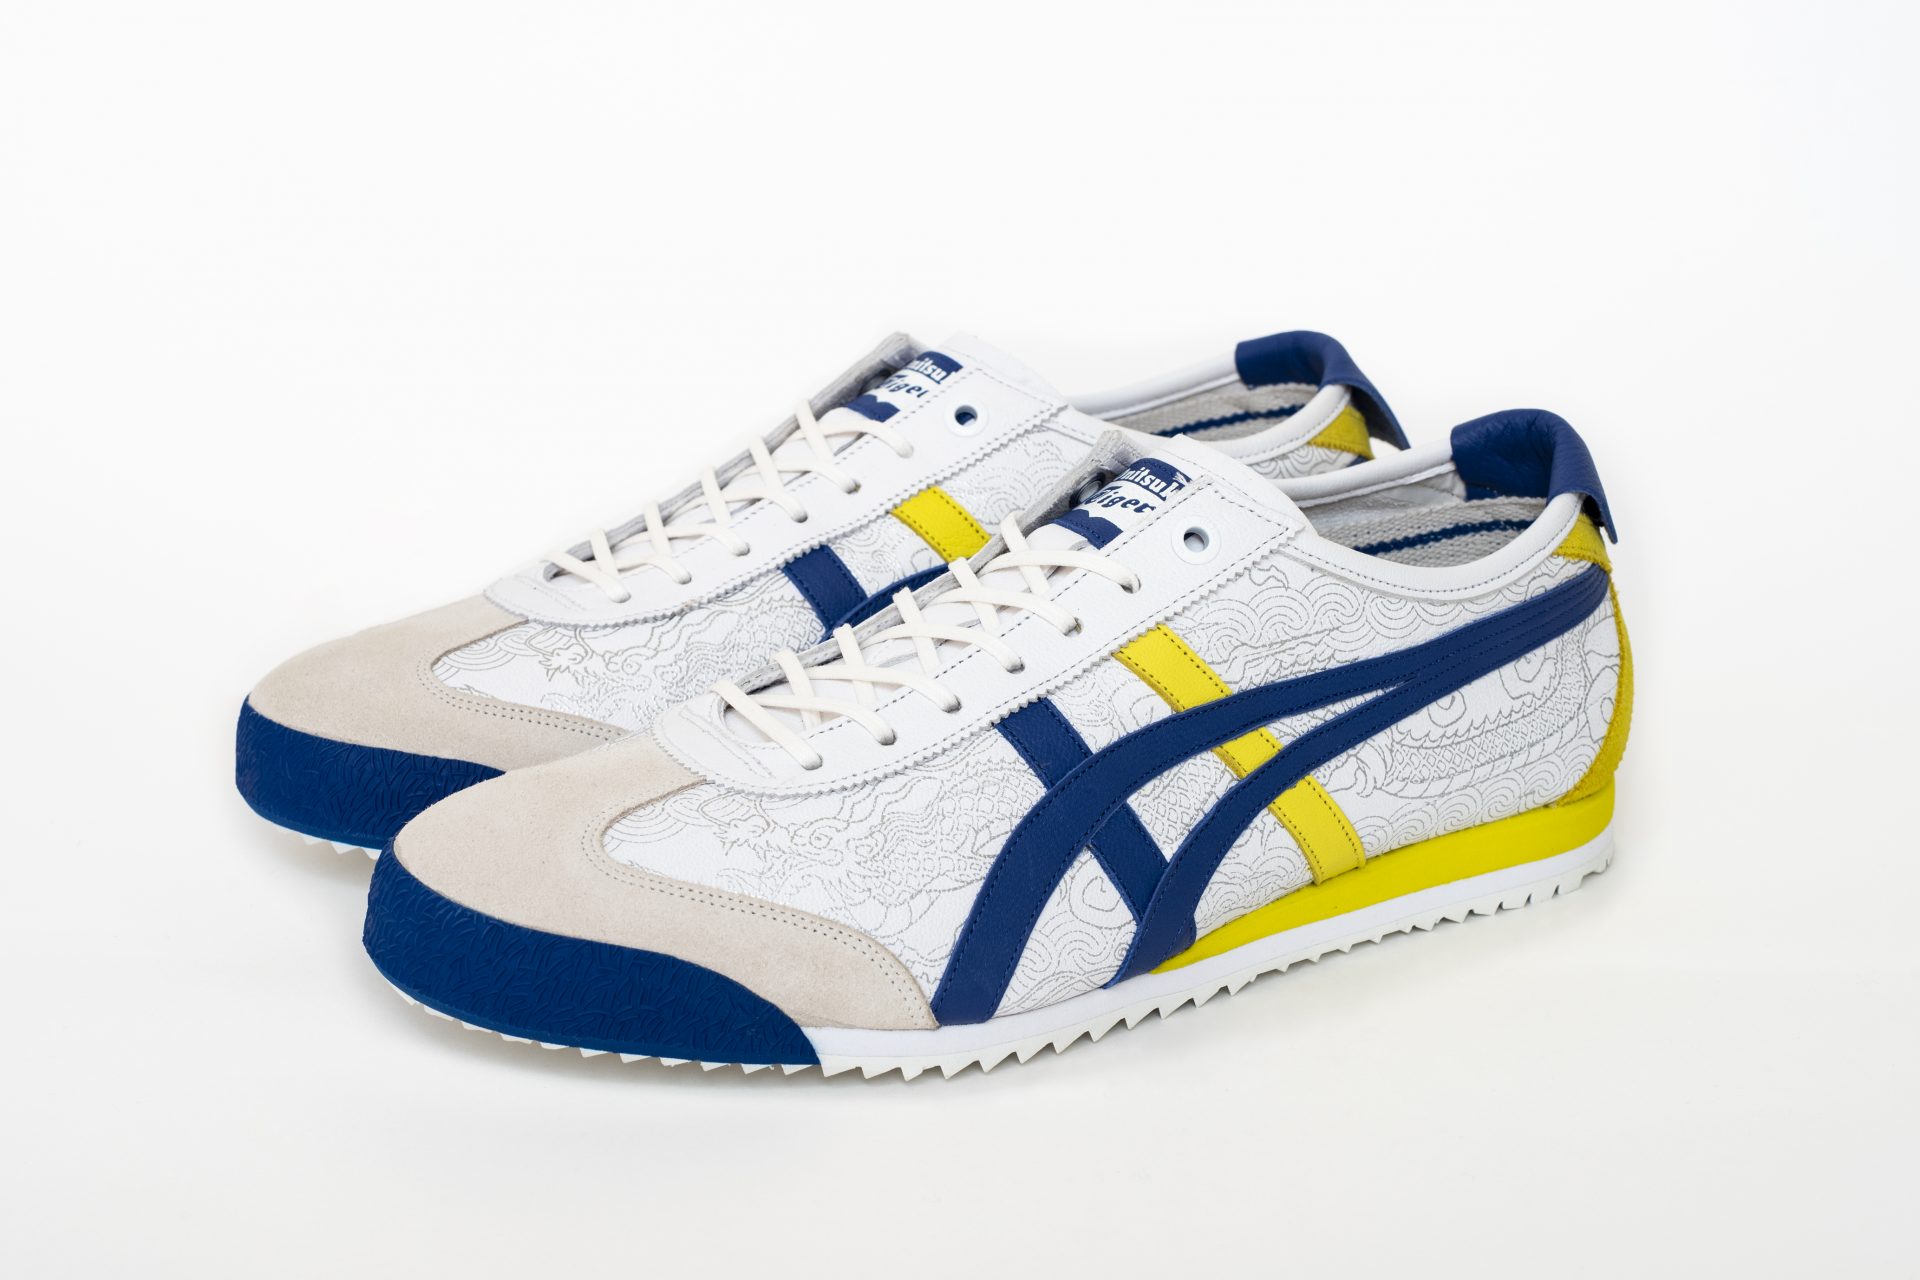 Dear Street Fighter fans, these Onitsuka Tigers are for you - SoyaCincau